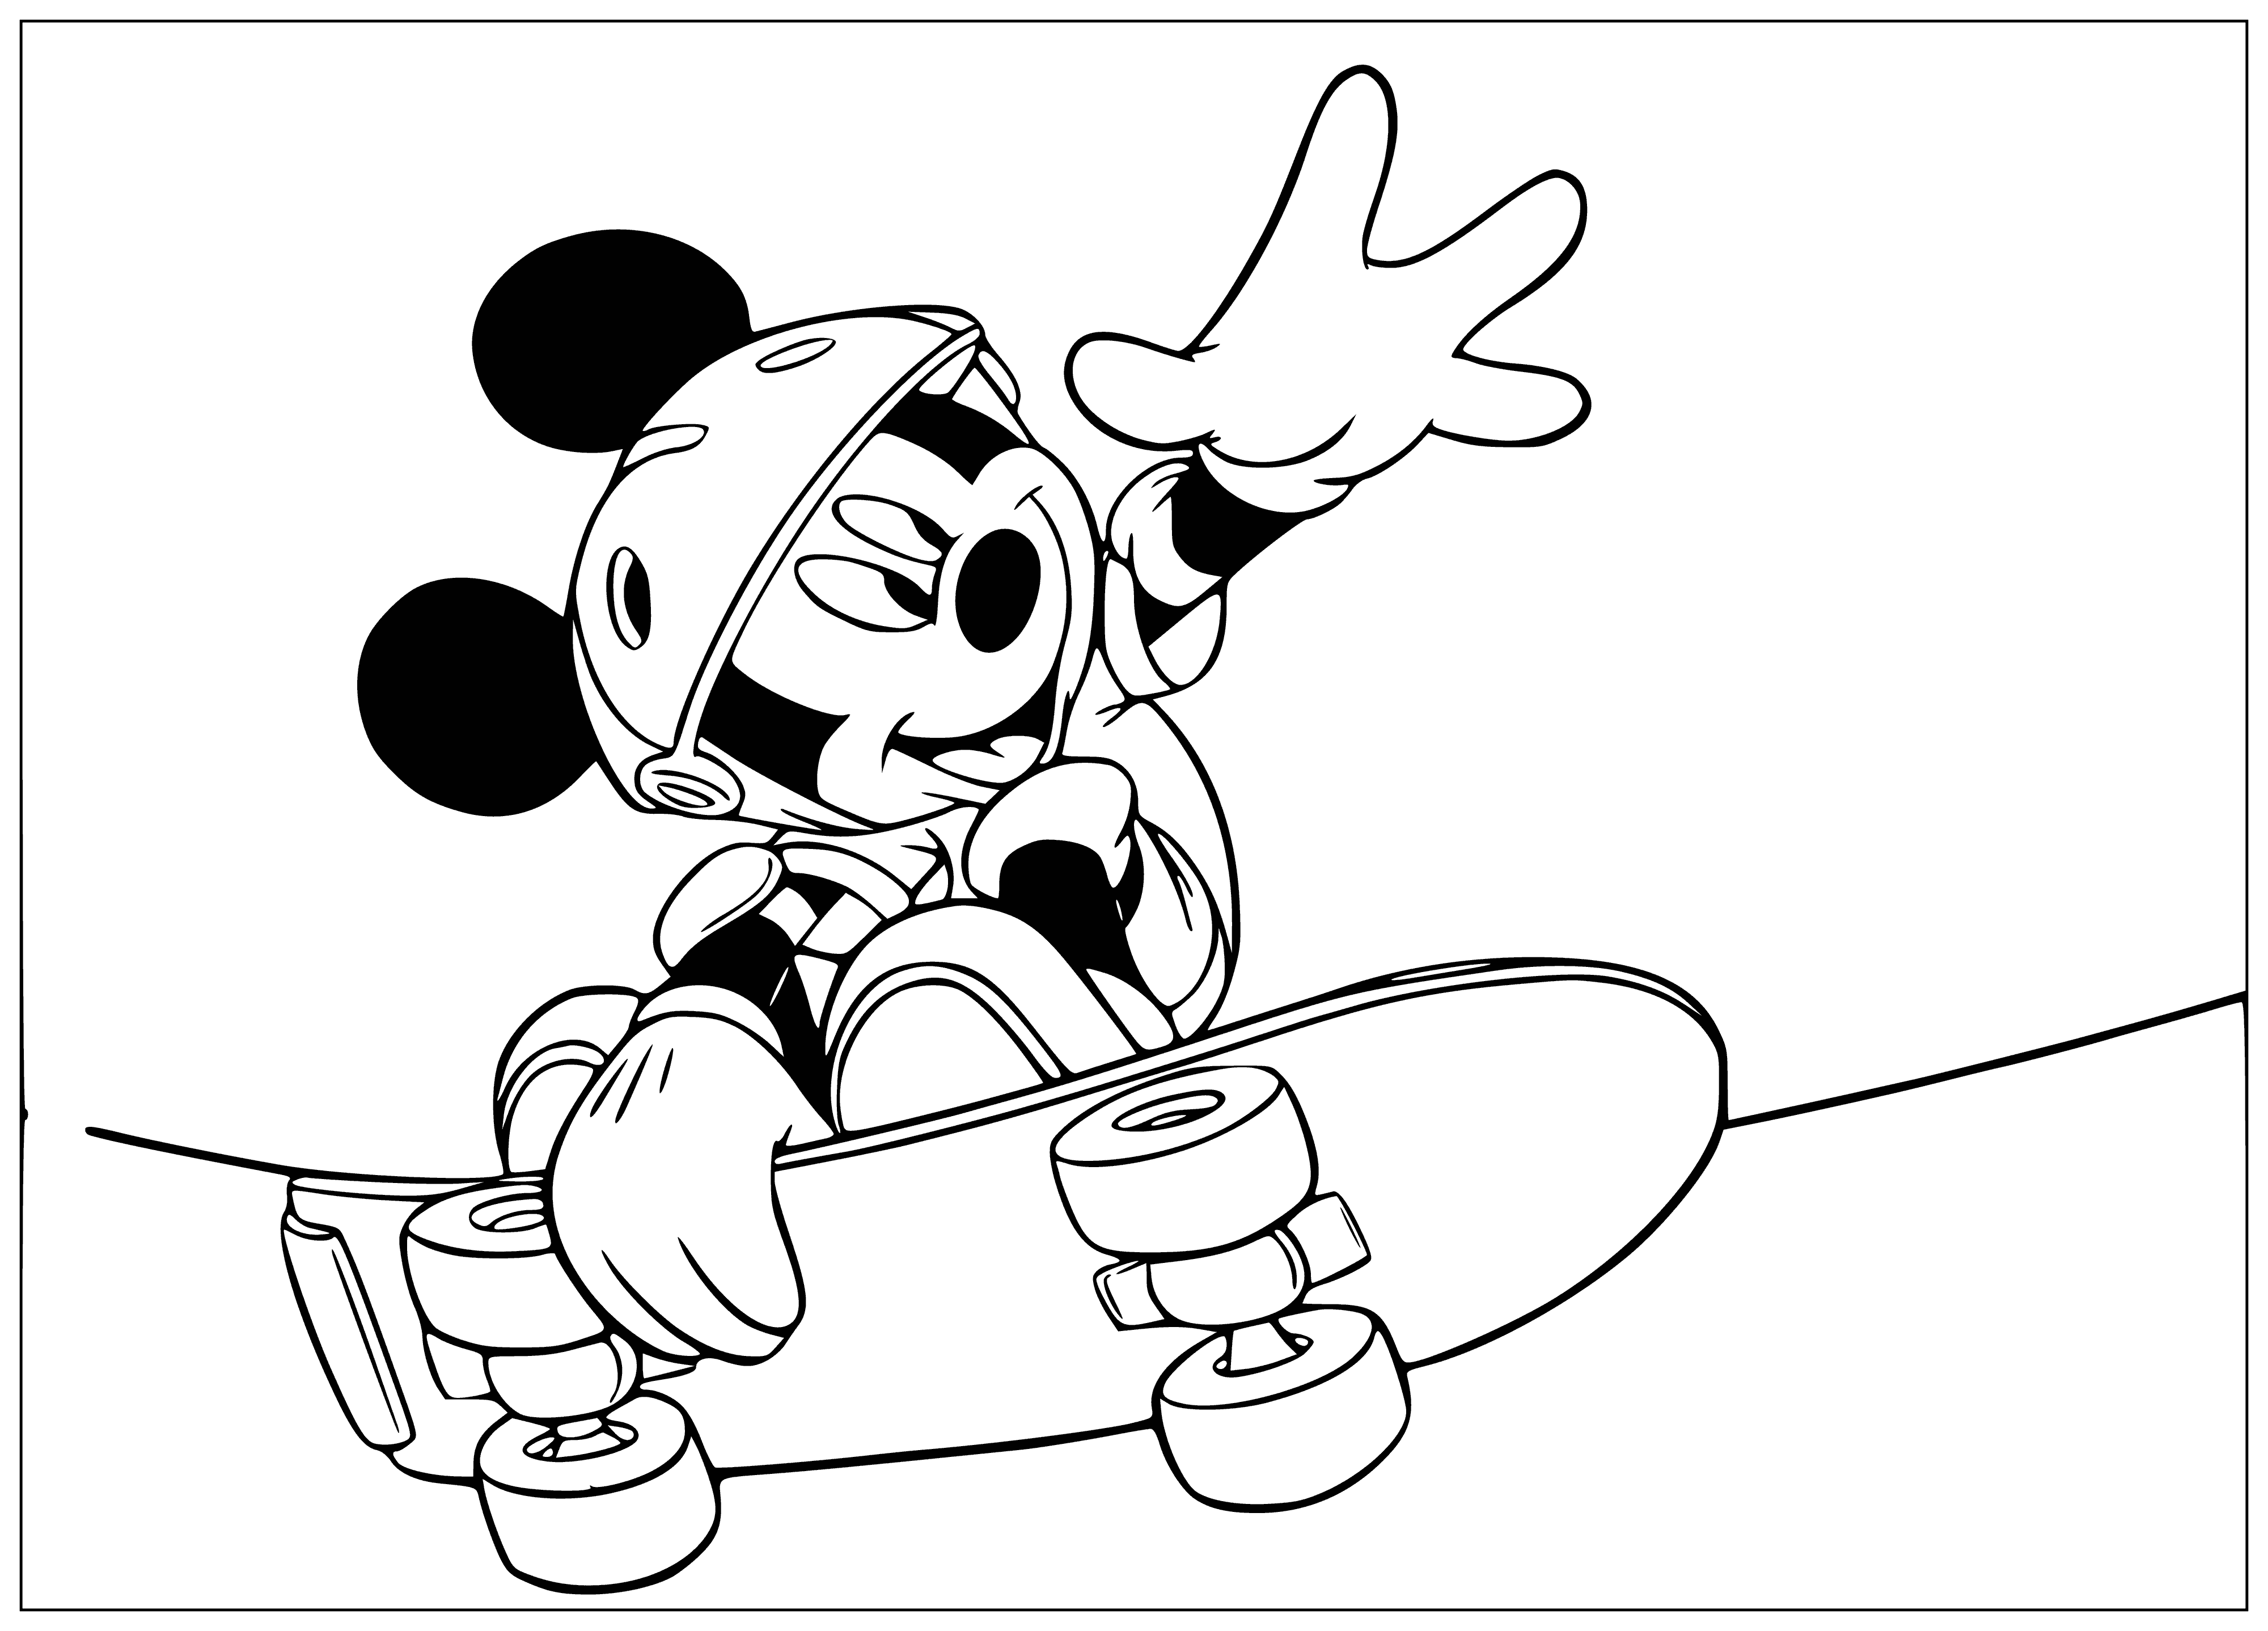 coloring page: Mickey, Minnie, and Donald skate together on blue, red, and black boards with coordinating outfits! #SkateCrew